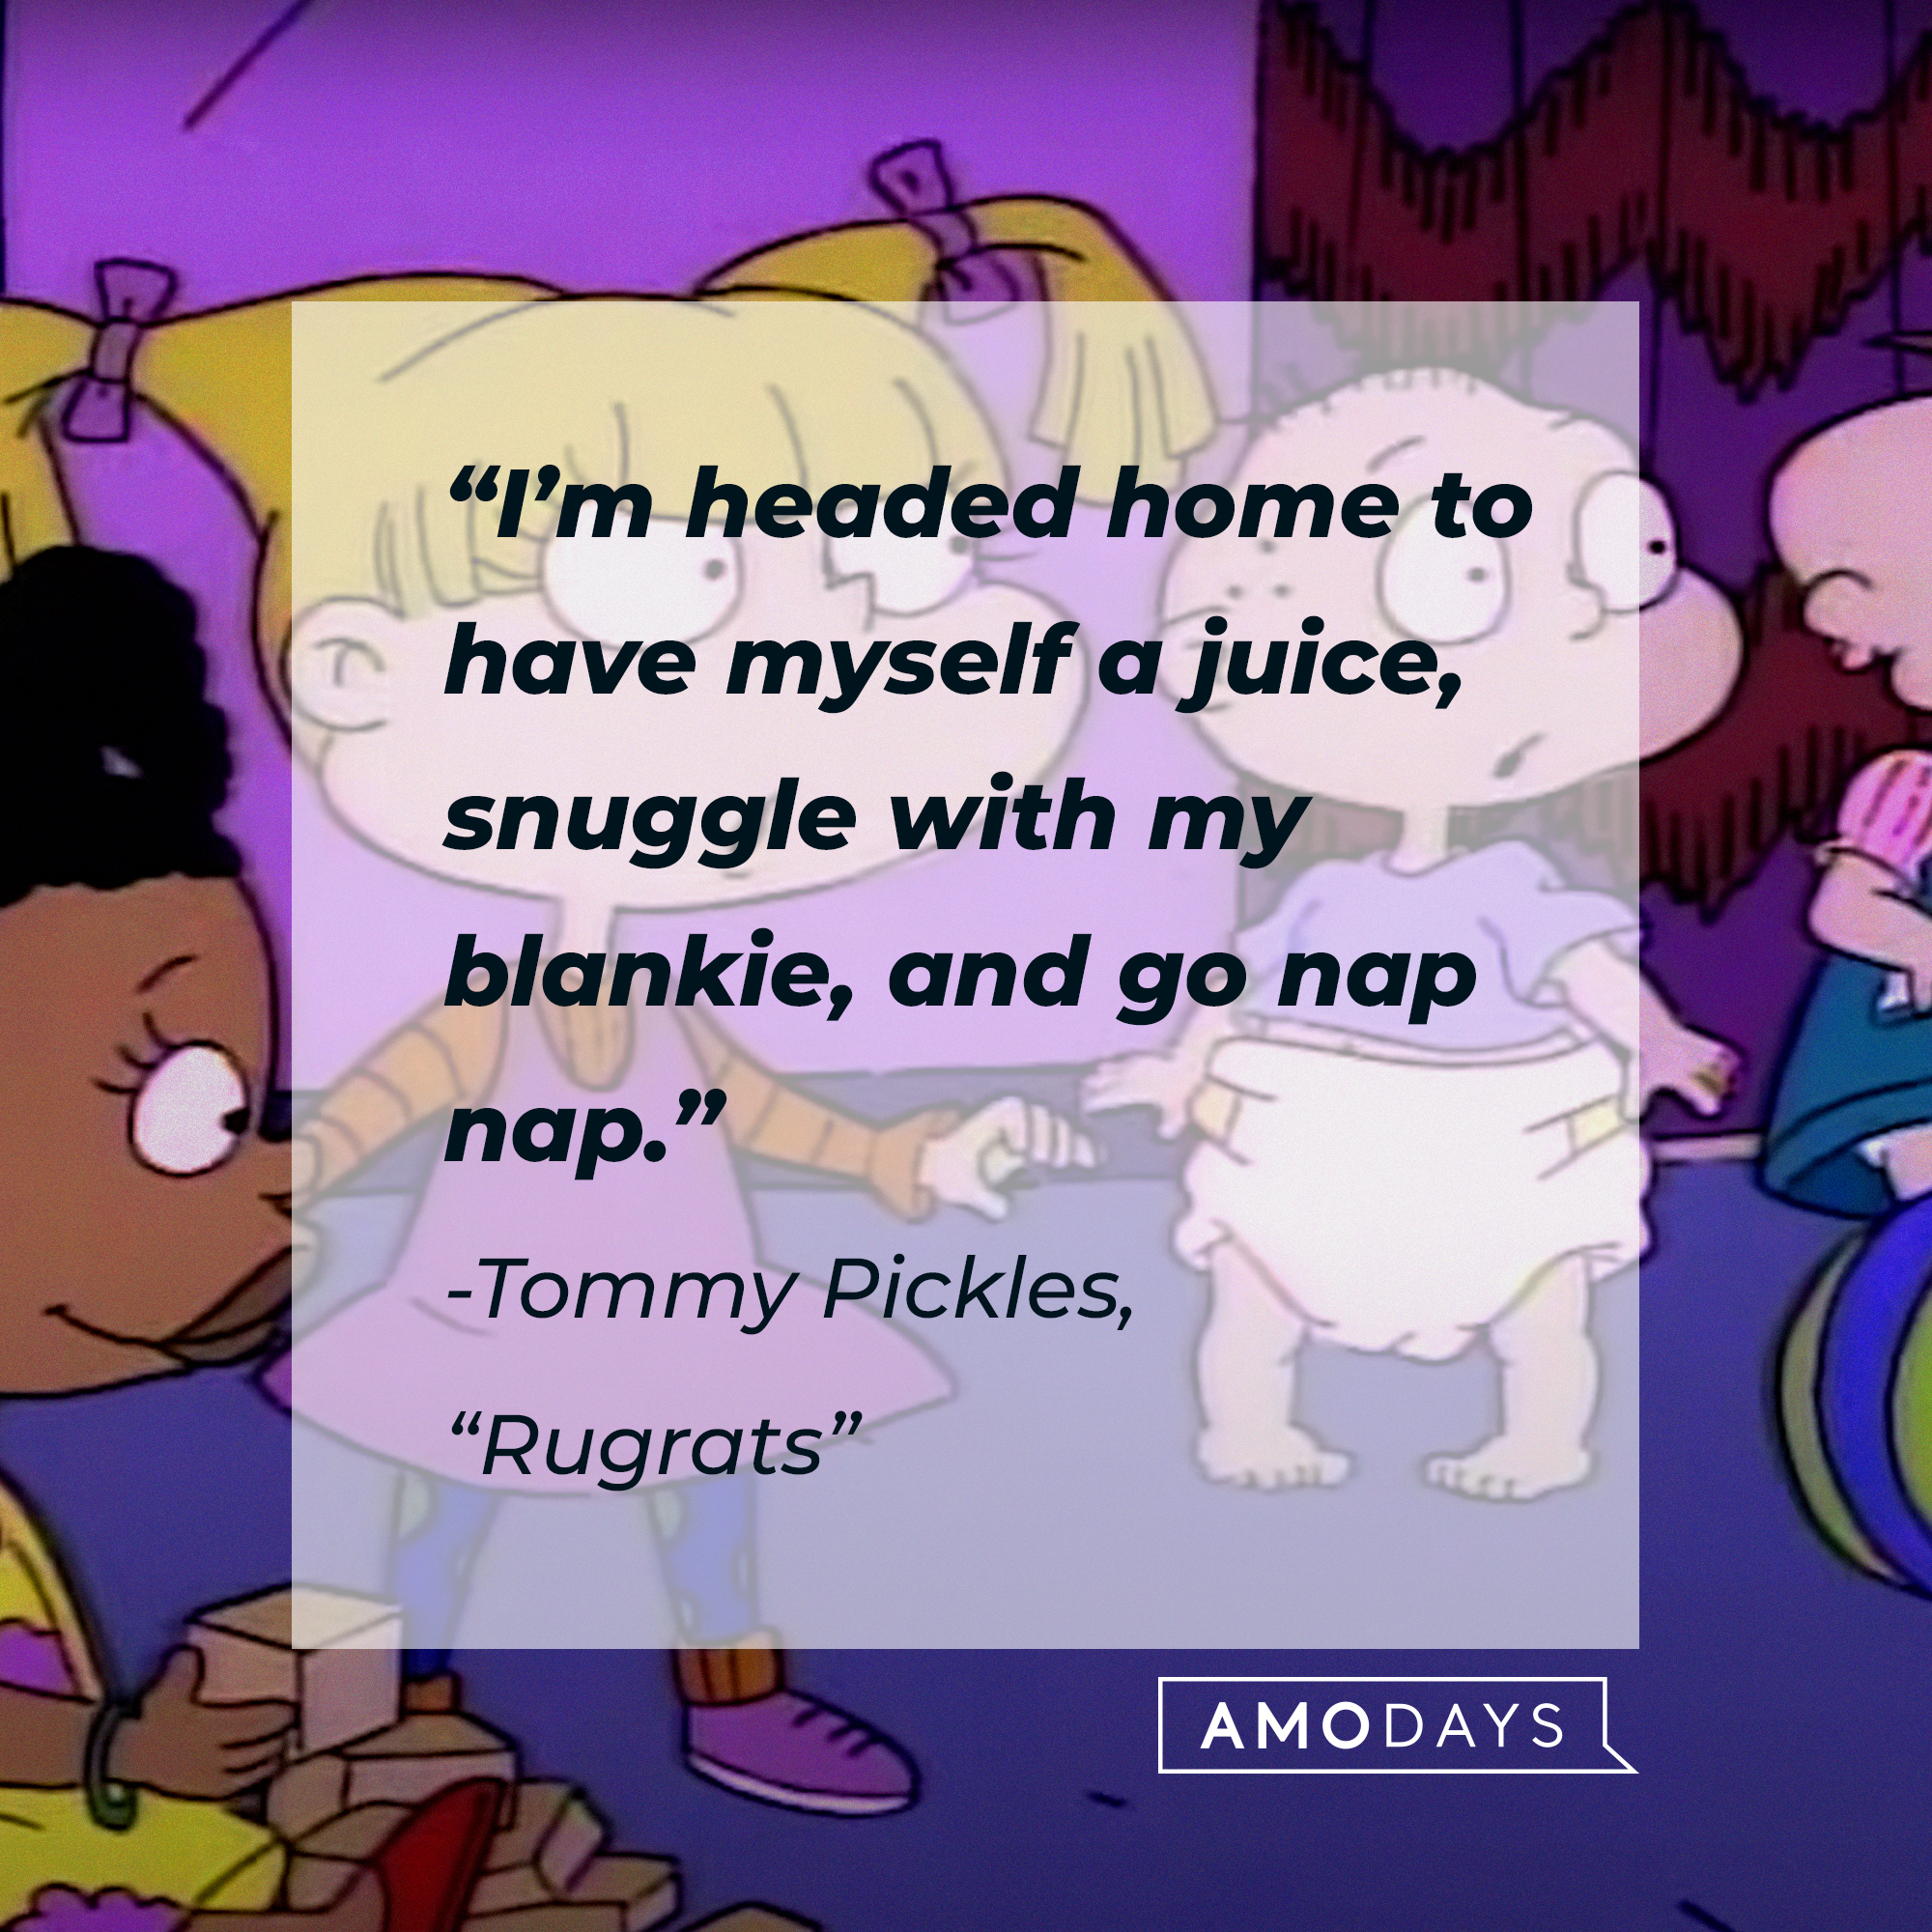 Tommy Pickles' and his quote: “I’m headed home to have myself a juice, snuggle with my blankie, and go nap nap.” | Source: Facebook.com/Rugrats